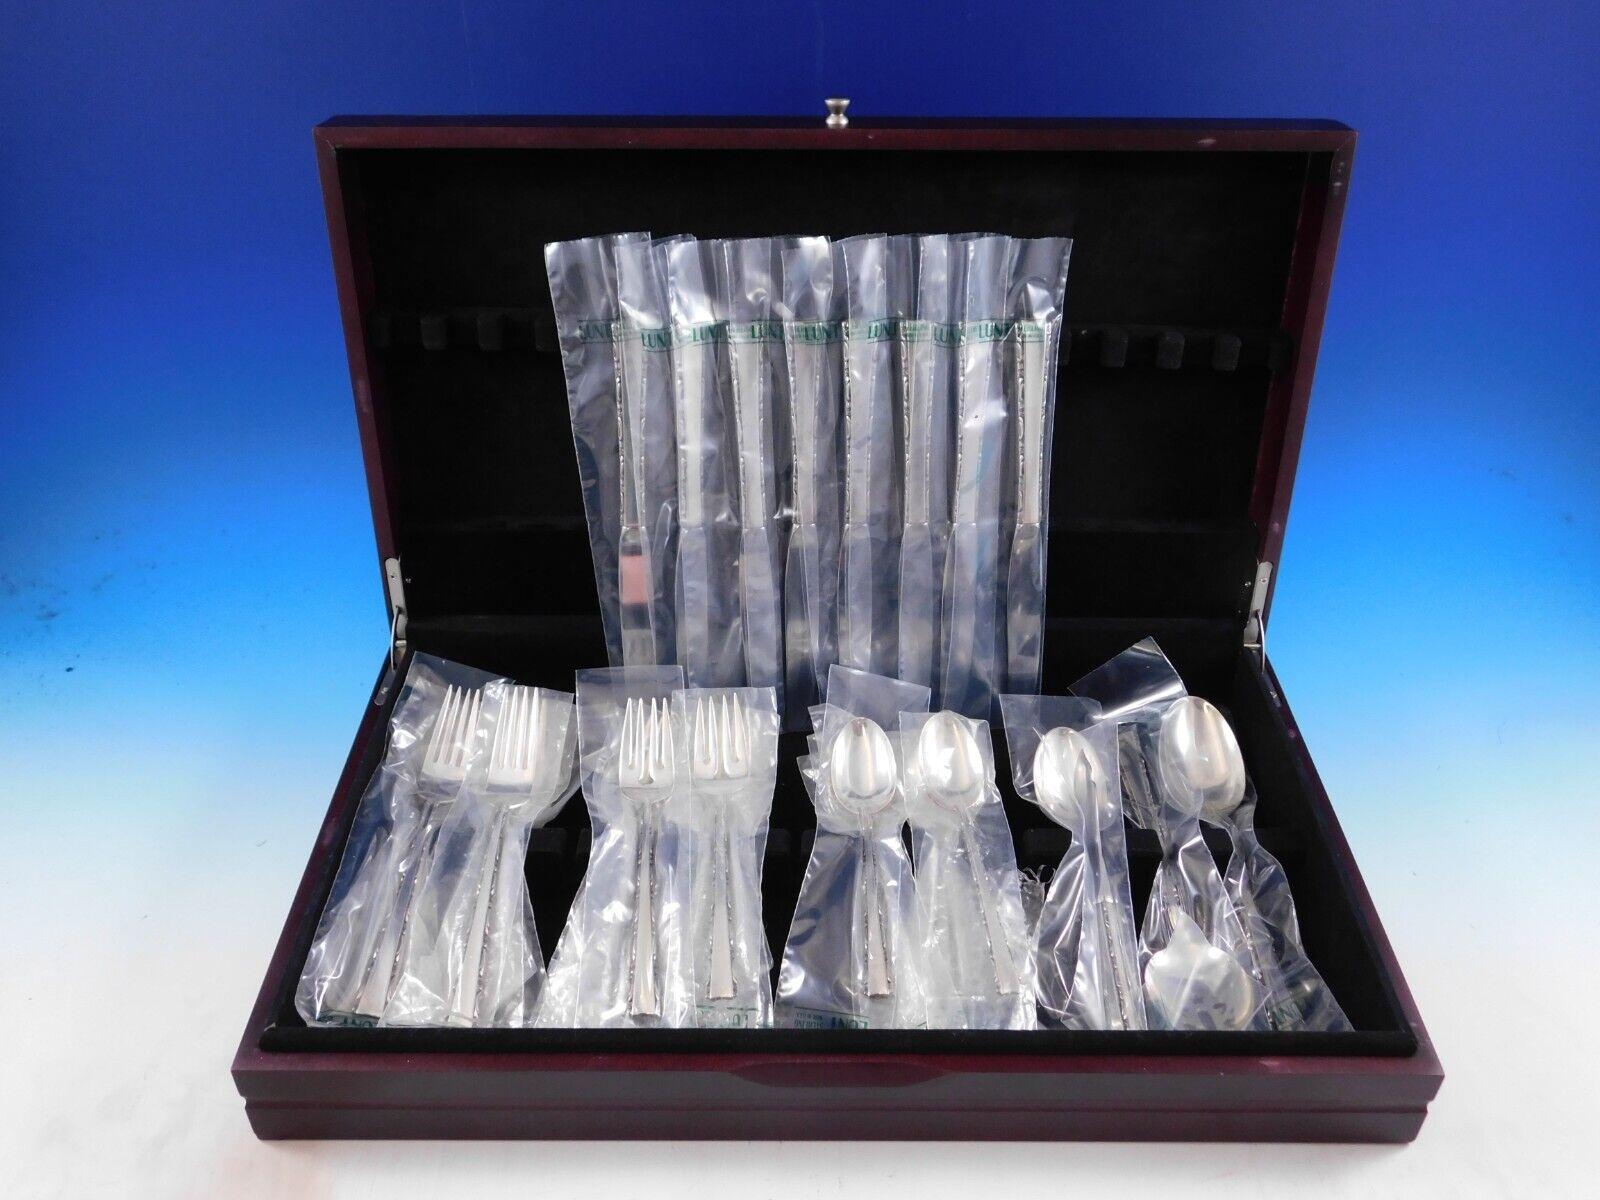 New, unused Madrigal by Lunt Sterling Silver Flatware set - 36 pieces. This set includes:

8 Knives, 9